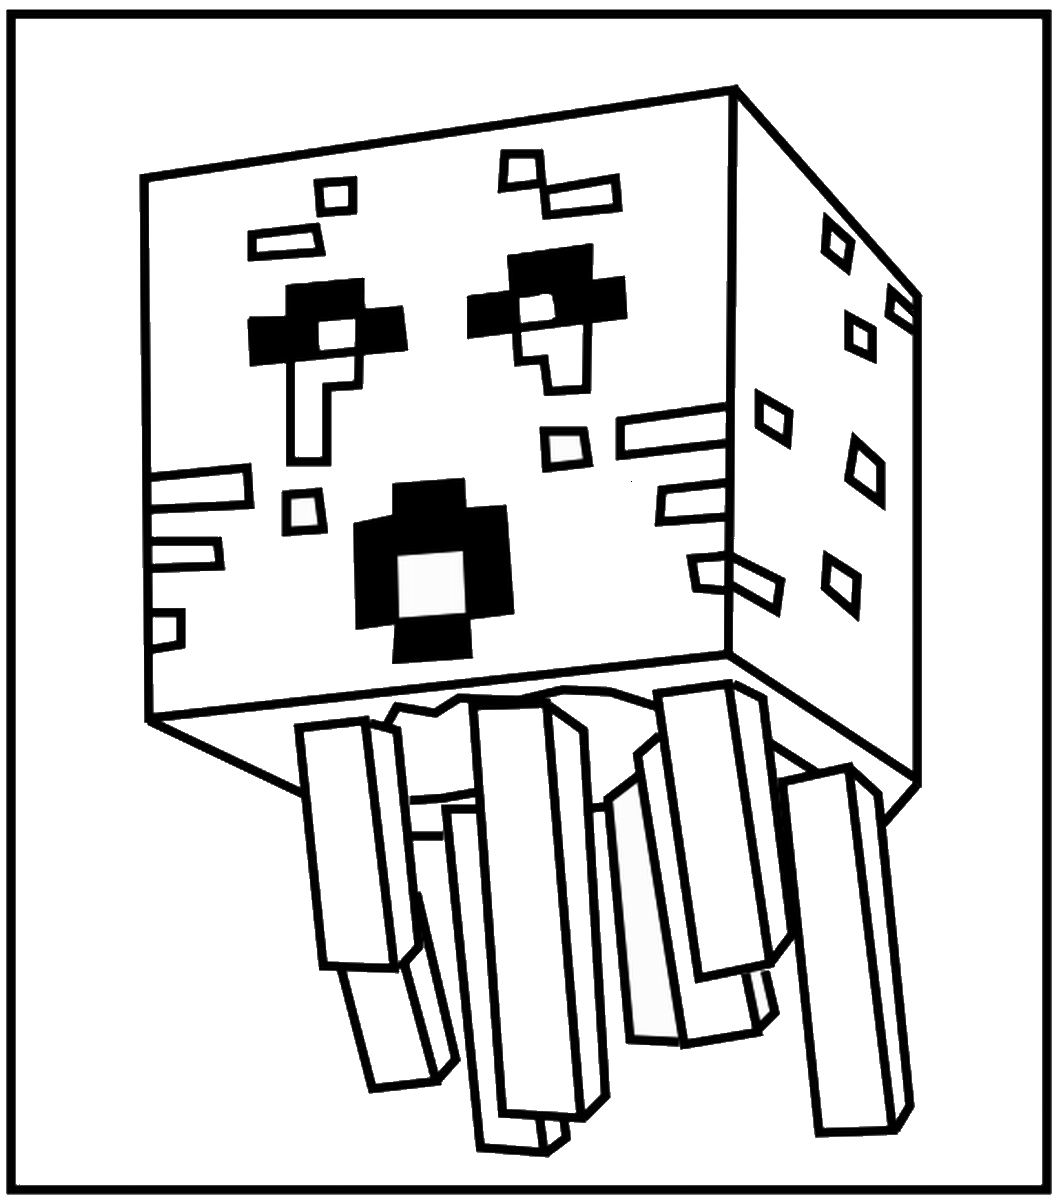 Minecraft Wither Storm Coloring Pages - 2 Free Coloring Sheets